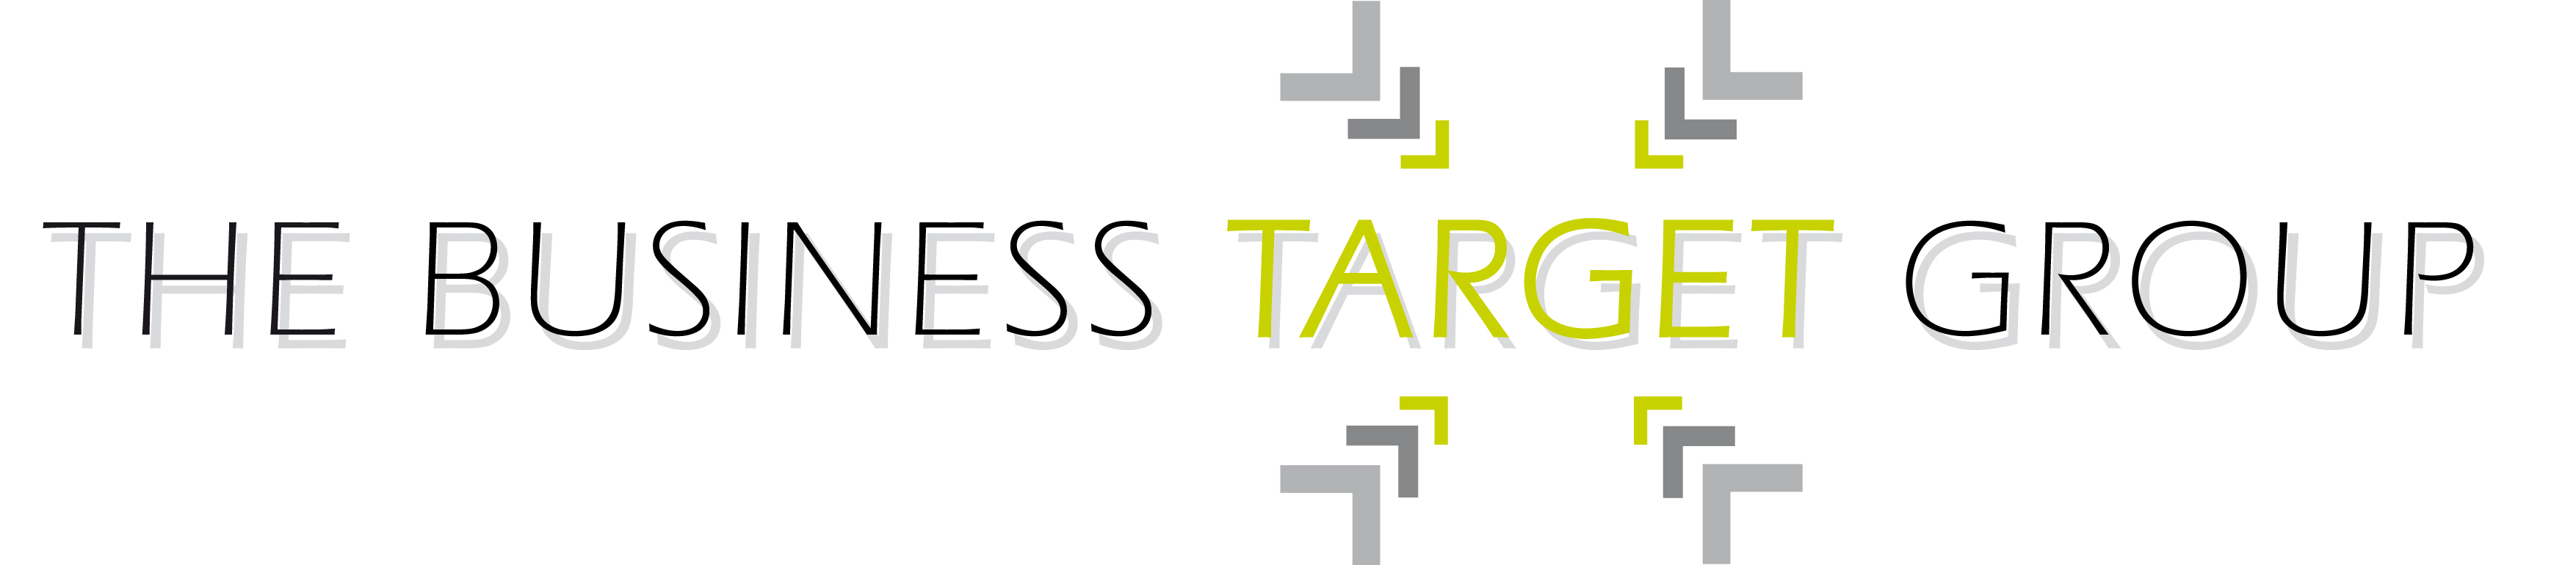 The Business Target Group 